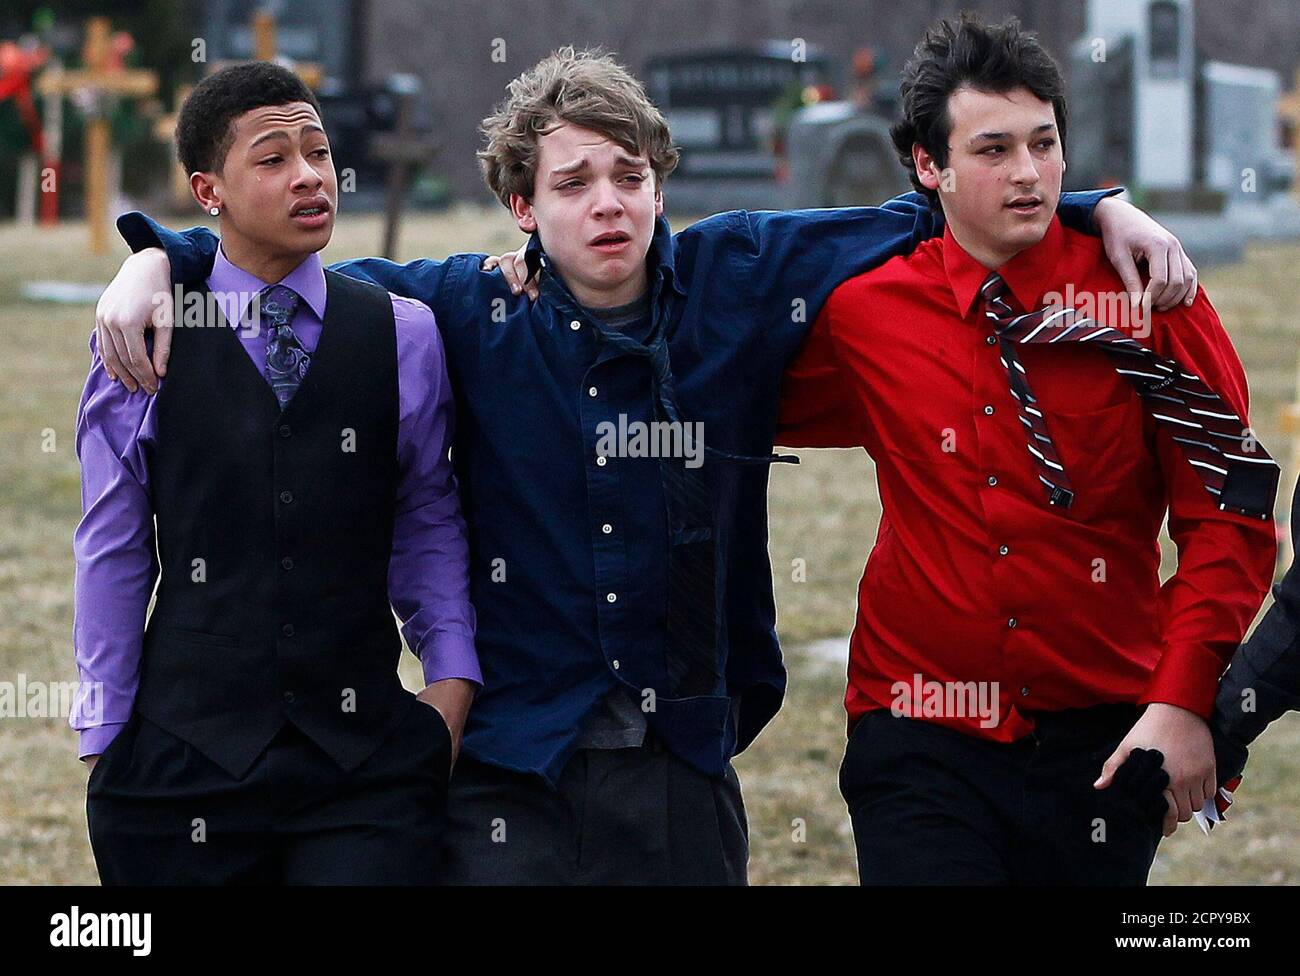 Students leave the gravesite of Chardon High School student Daniel Parmertor  after his burial in Chardon, Ohio March 3, 2012. Prosecutors in Ohio on  Thursday formally charged 17-year-old T.J. Lane with three